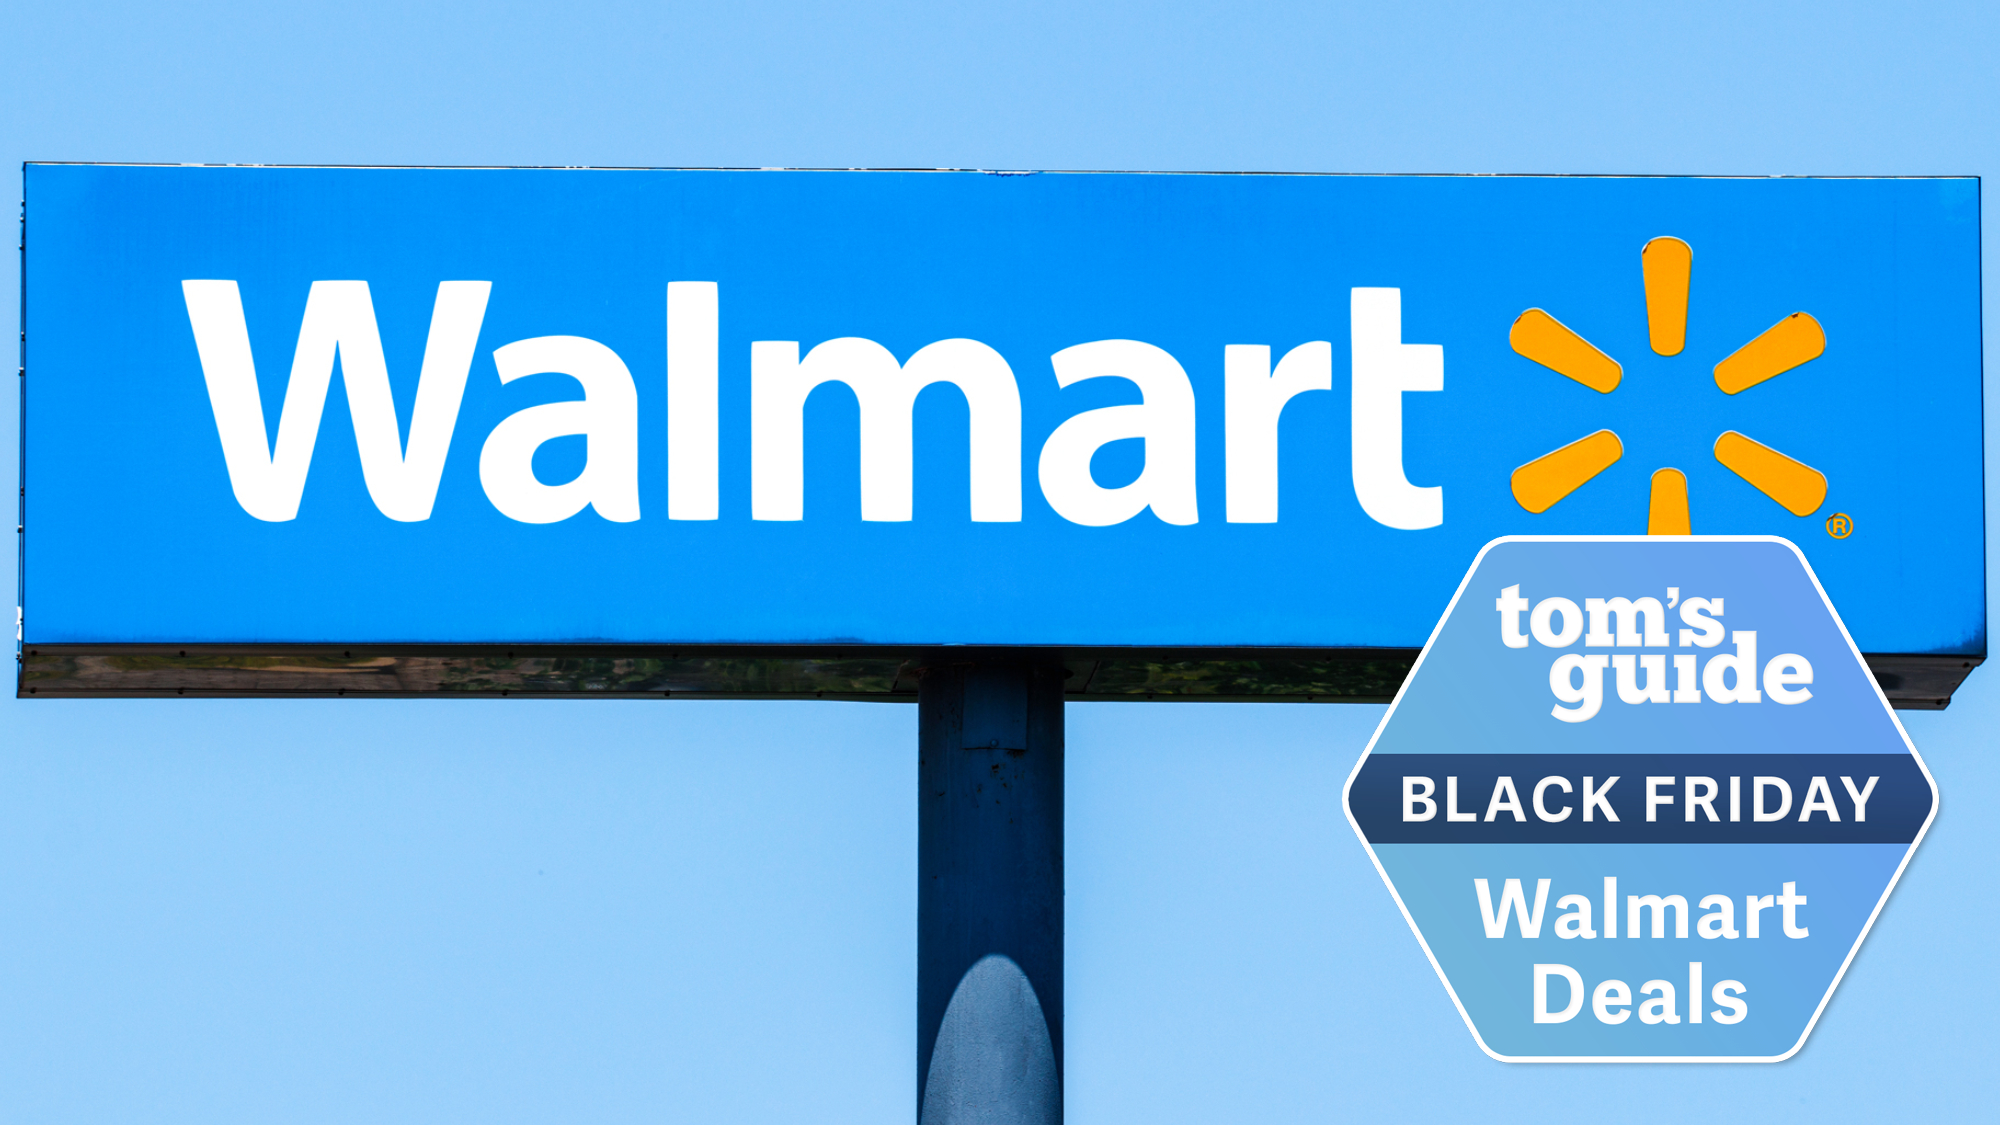 Walmart's Black Friday 2022 Deals for Days starts Monday with more